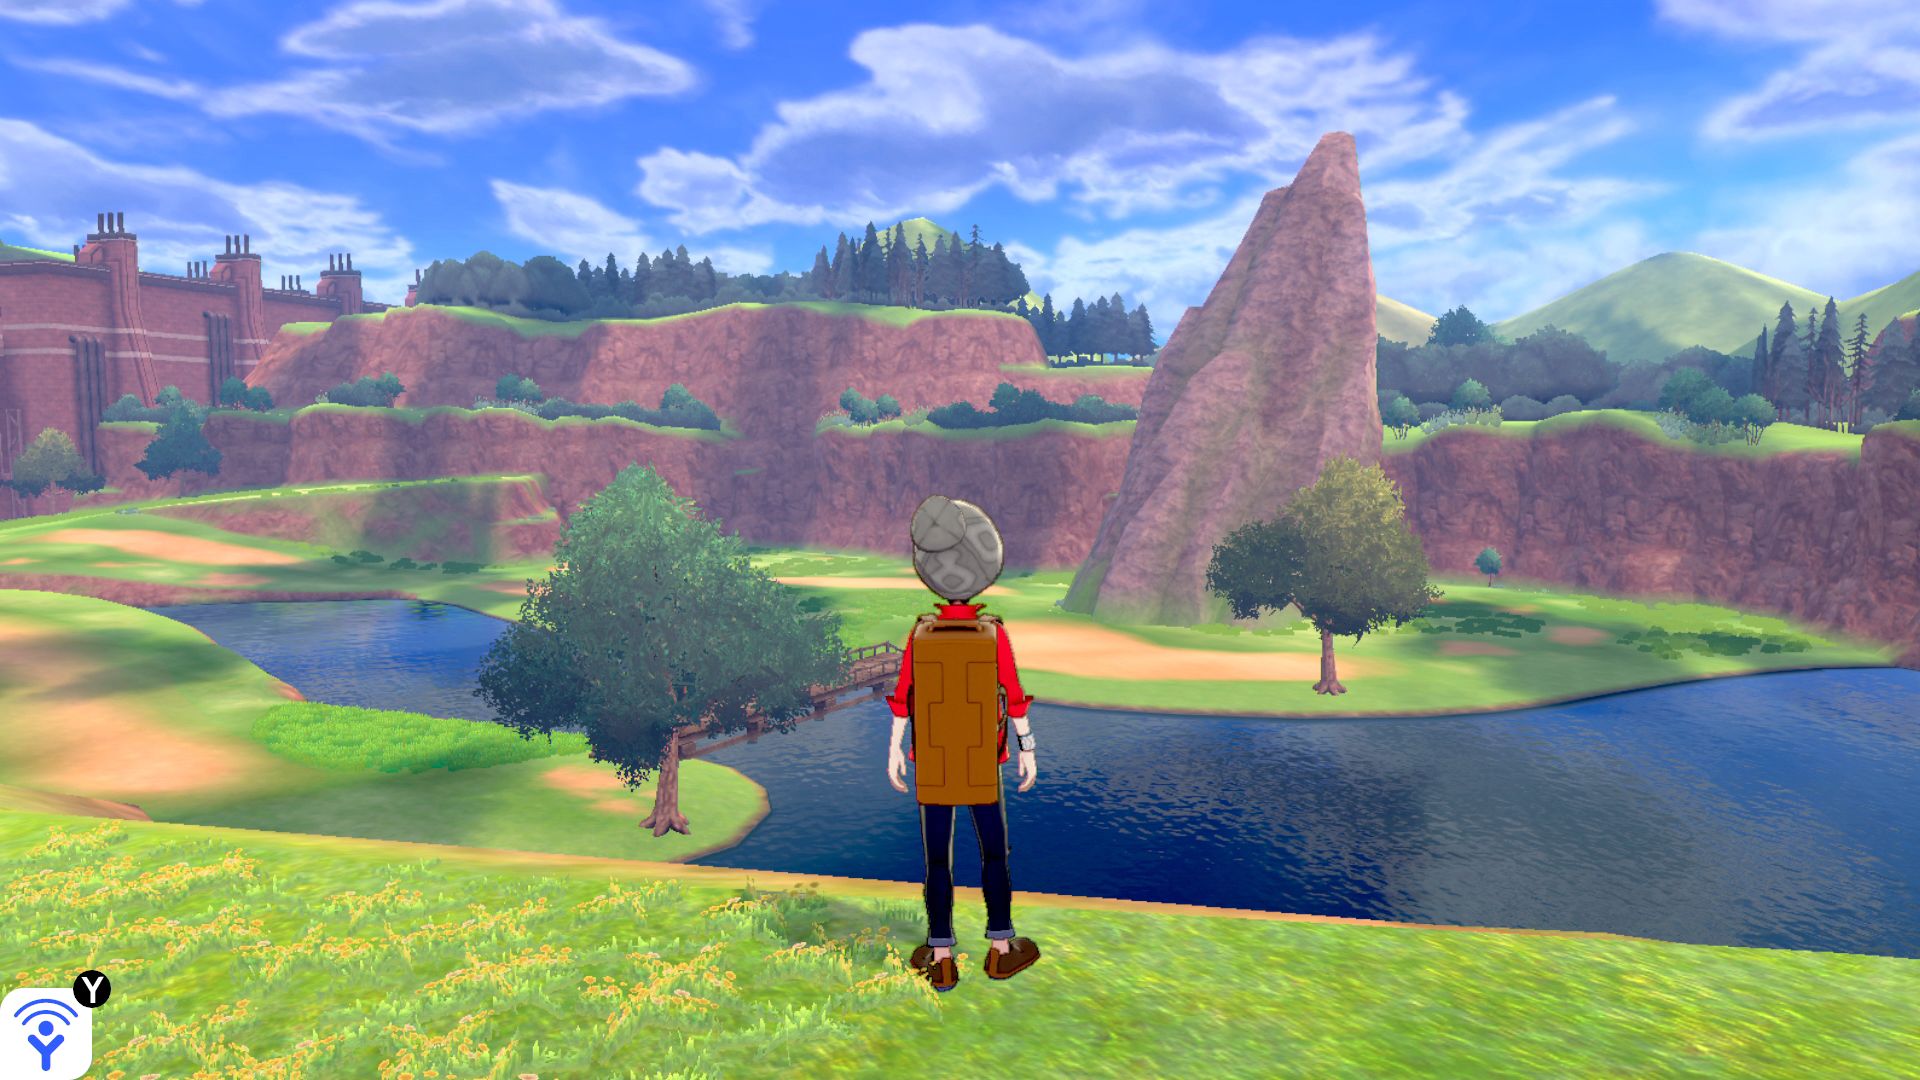 Pokemon Sword and Shield E3 2019 Hands-on Preview